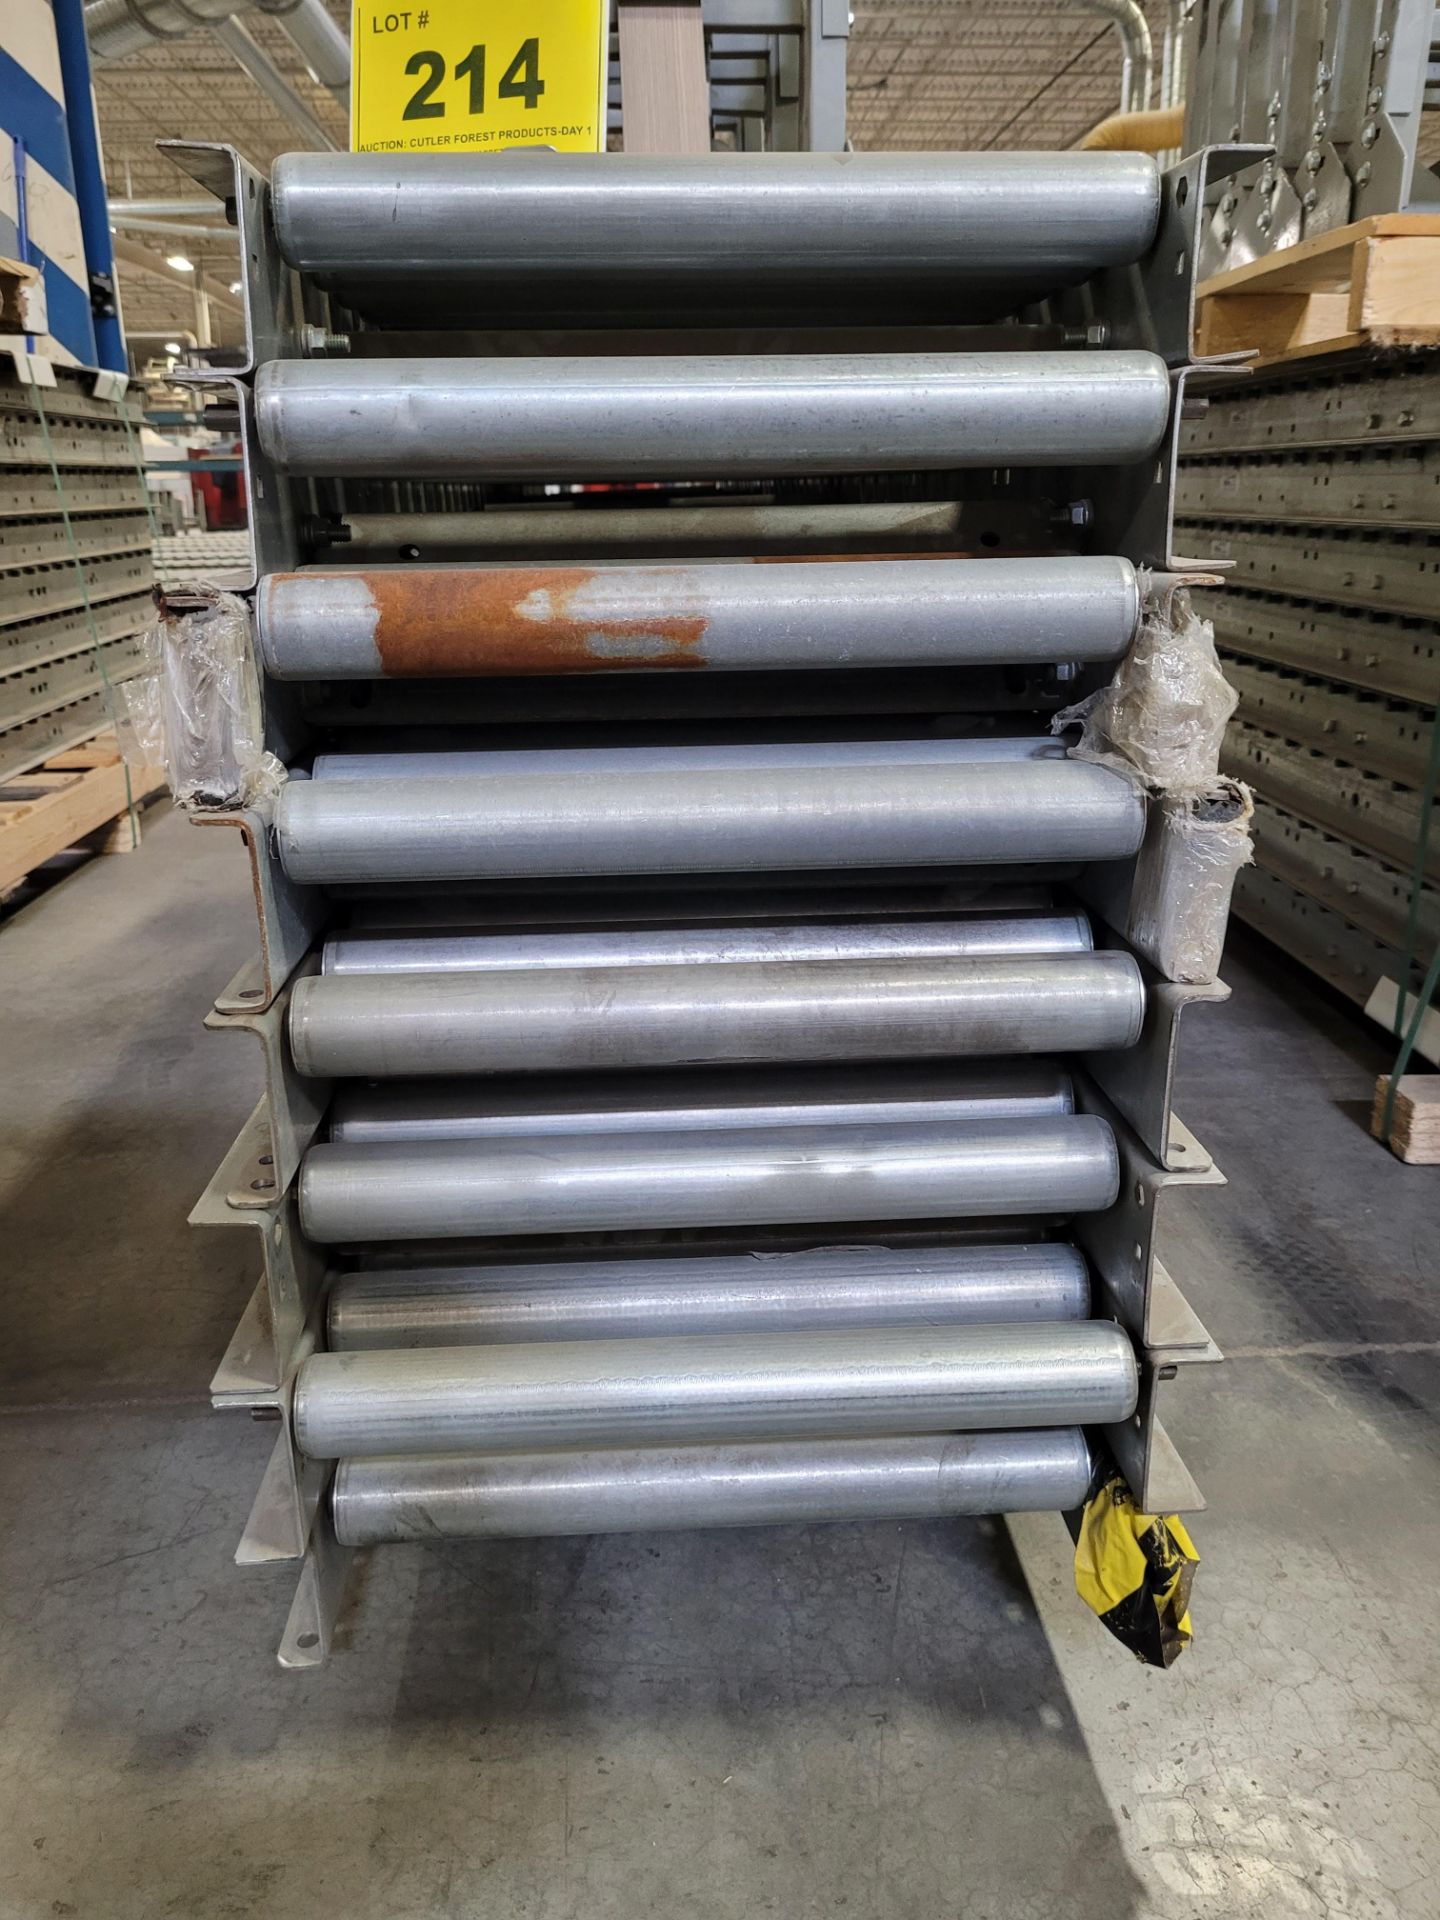 LOT - (8) 120"L X 18"W ROLLER TOP CONVEYORS W/ (8) STANDS - Image 2 of 2